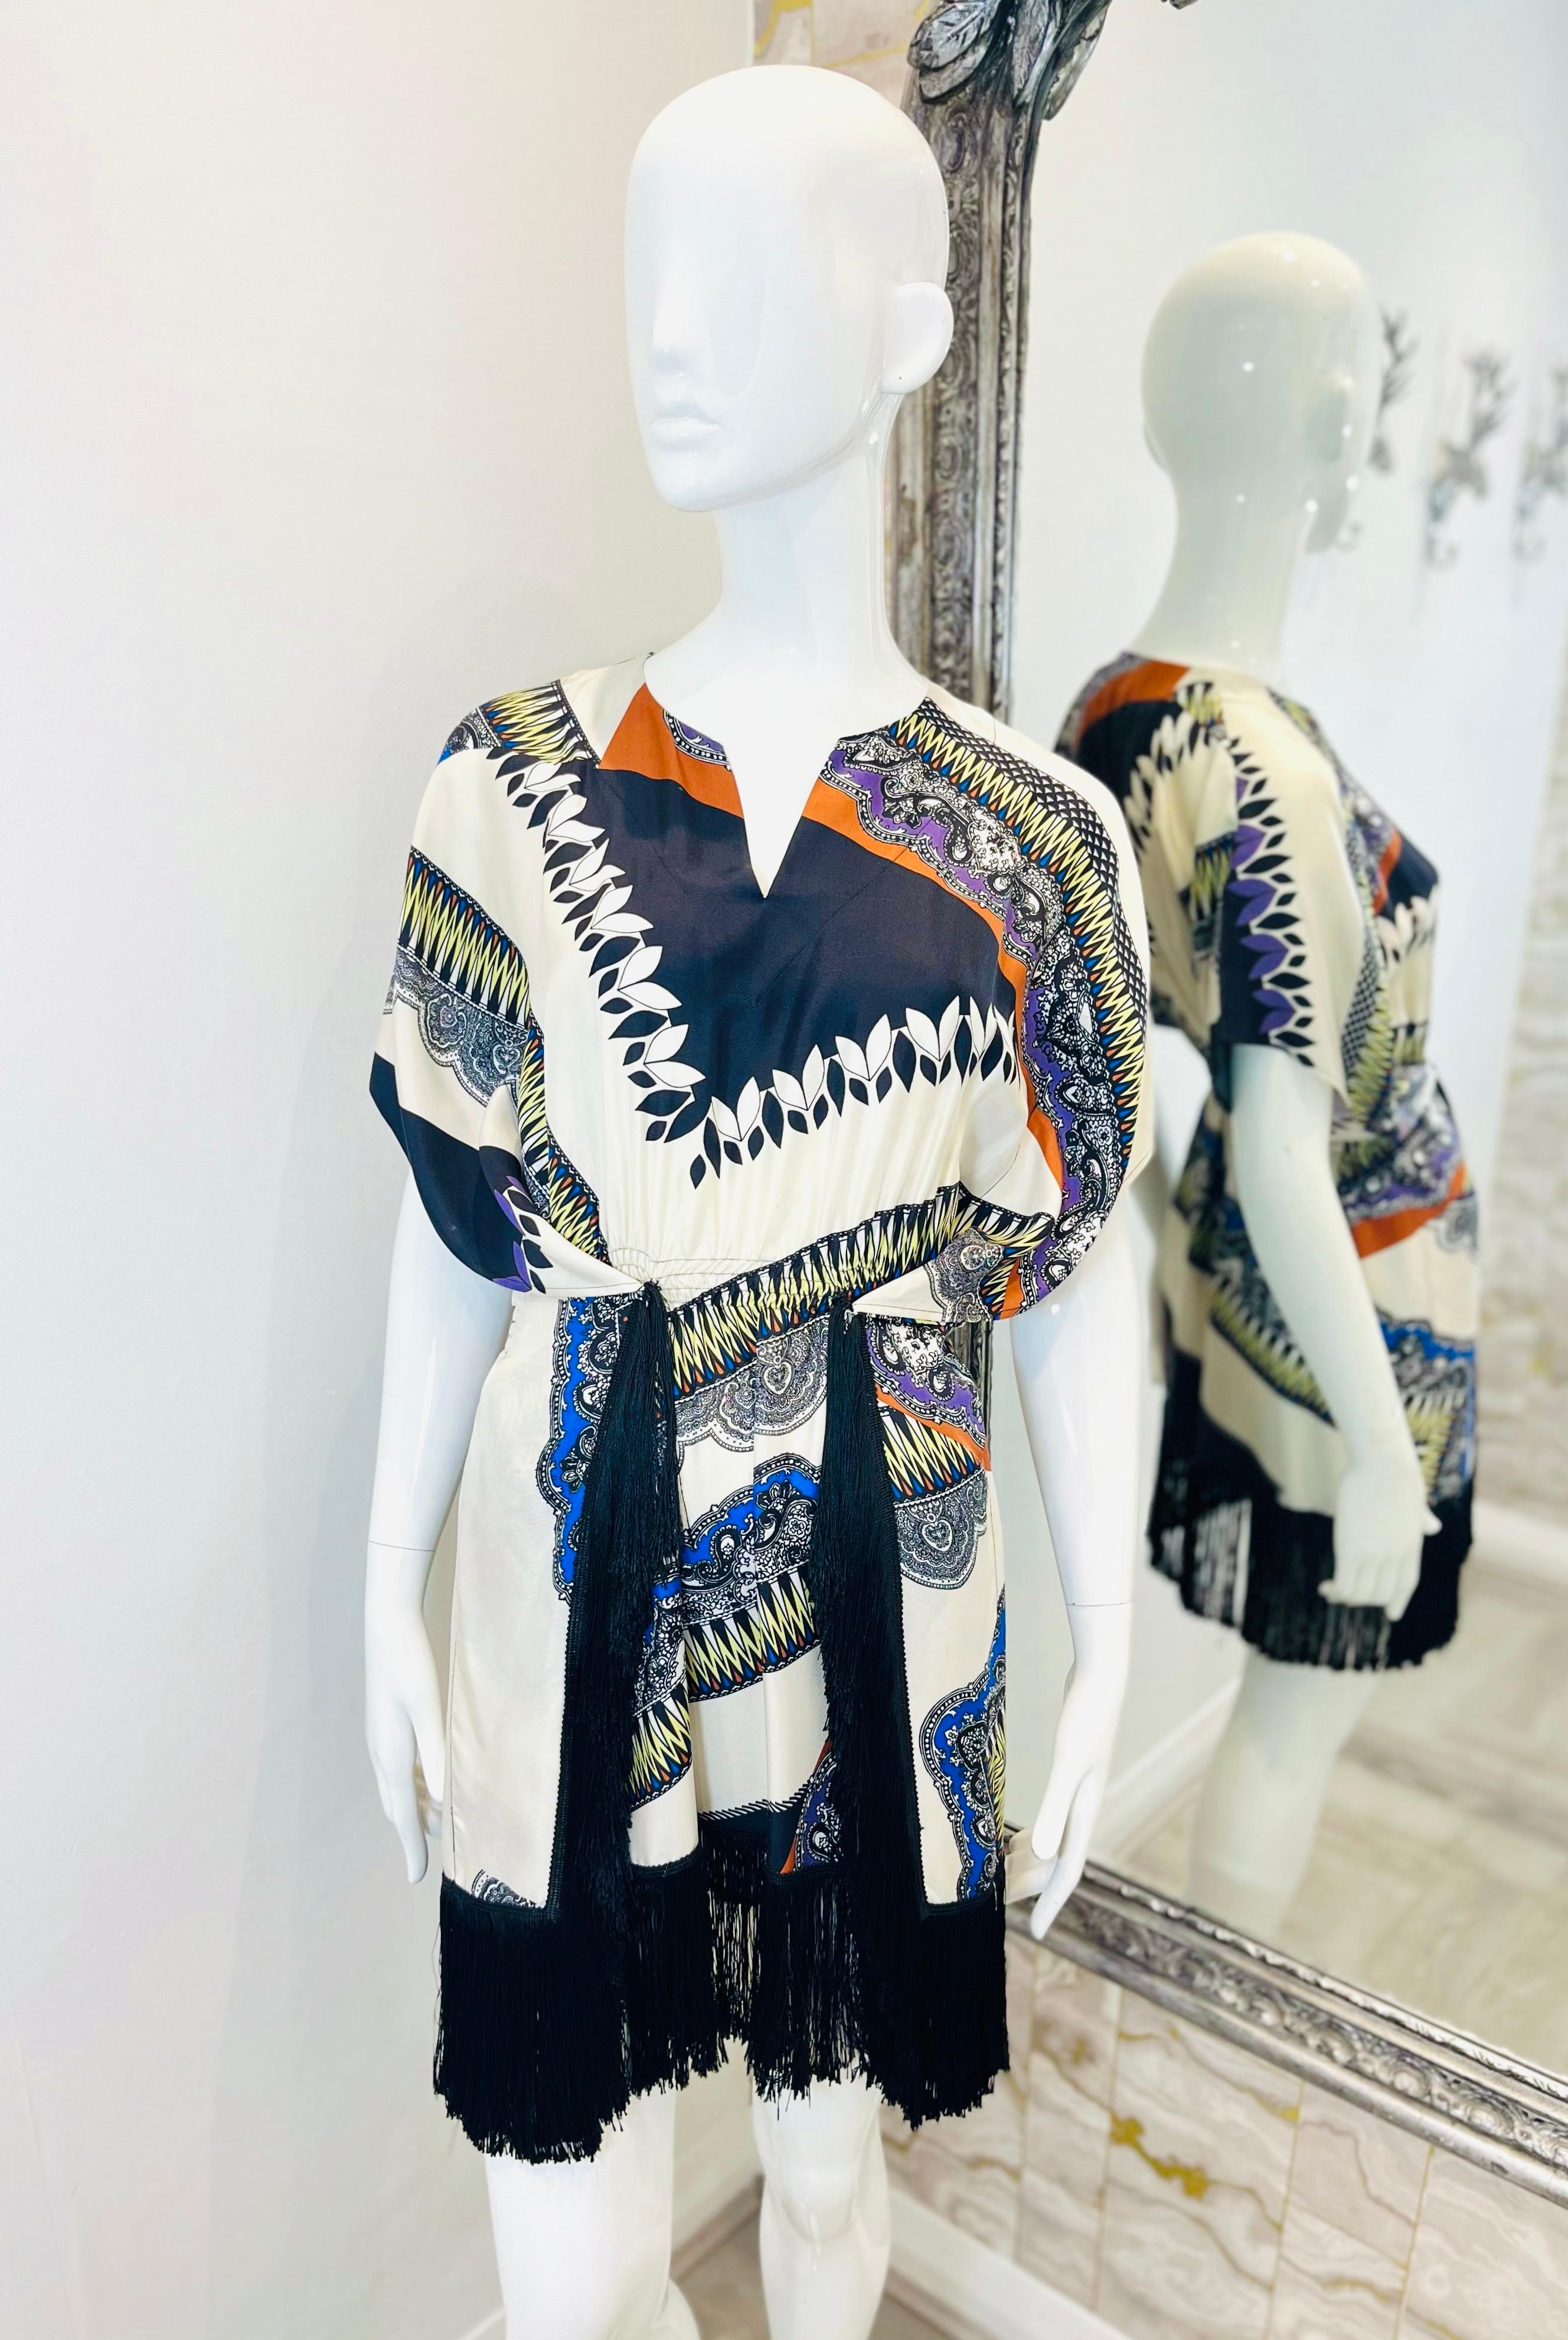 Etro Printed Silk Dress With Fringe Trim

Blue and white dress designed with Paisley and geometric prints with orange and purple accents.

Featuring flattering silhouette with wide kimono-style sleeves and above-the-knee skirt styled with wrap